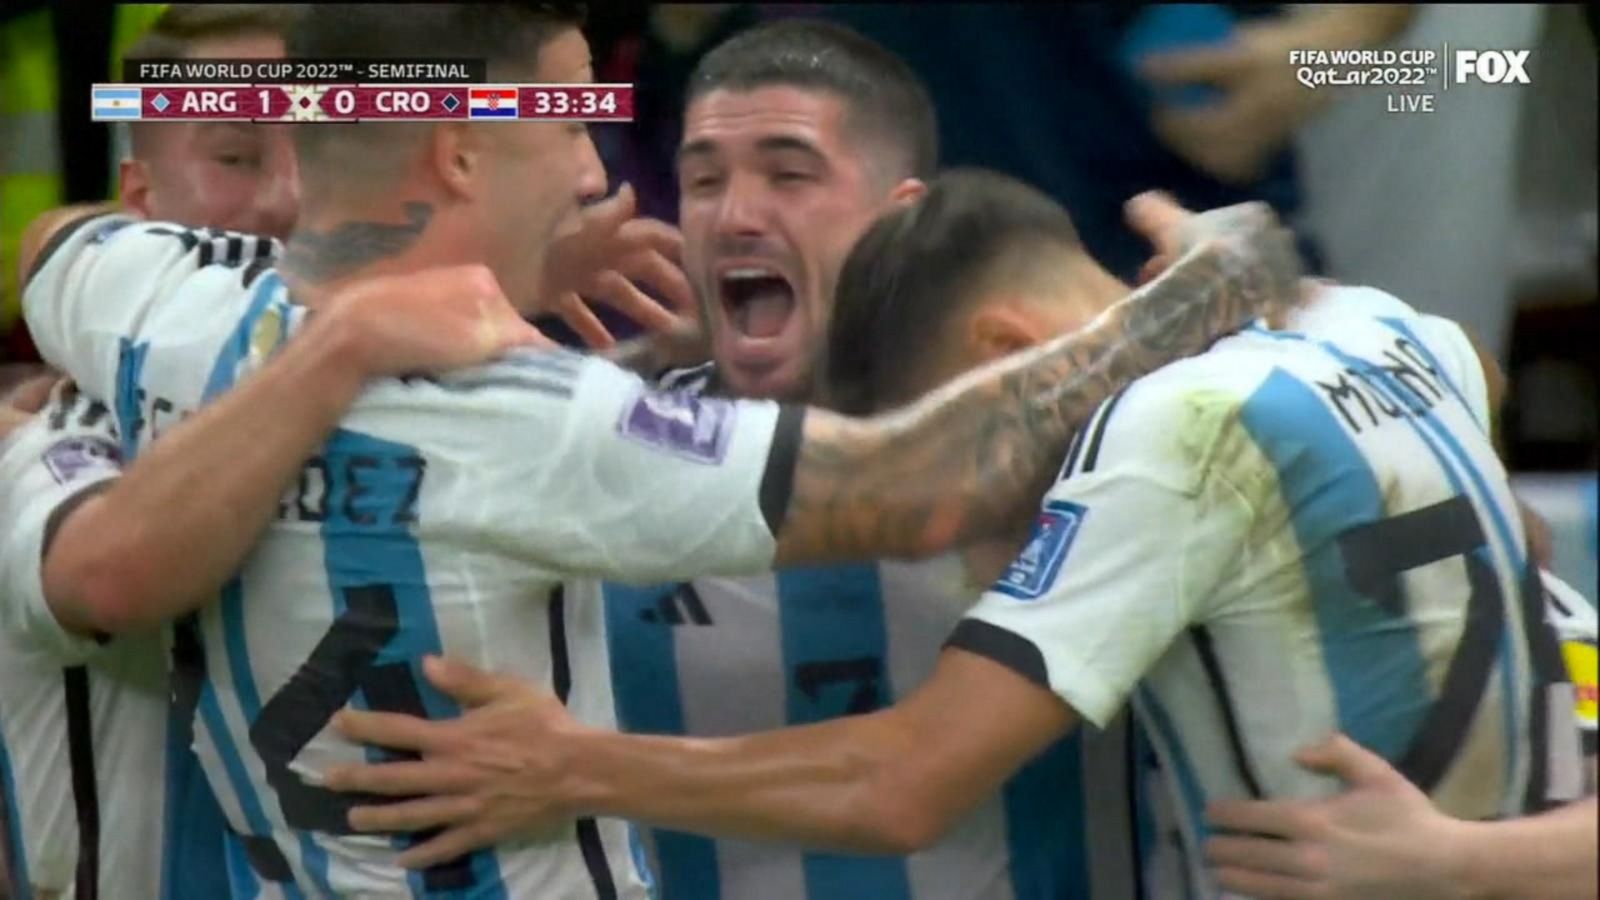 Messi celebrates Argentina heading to World Cup final